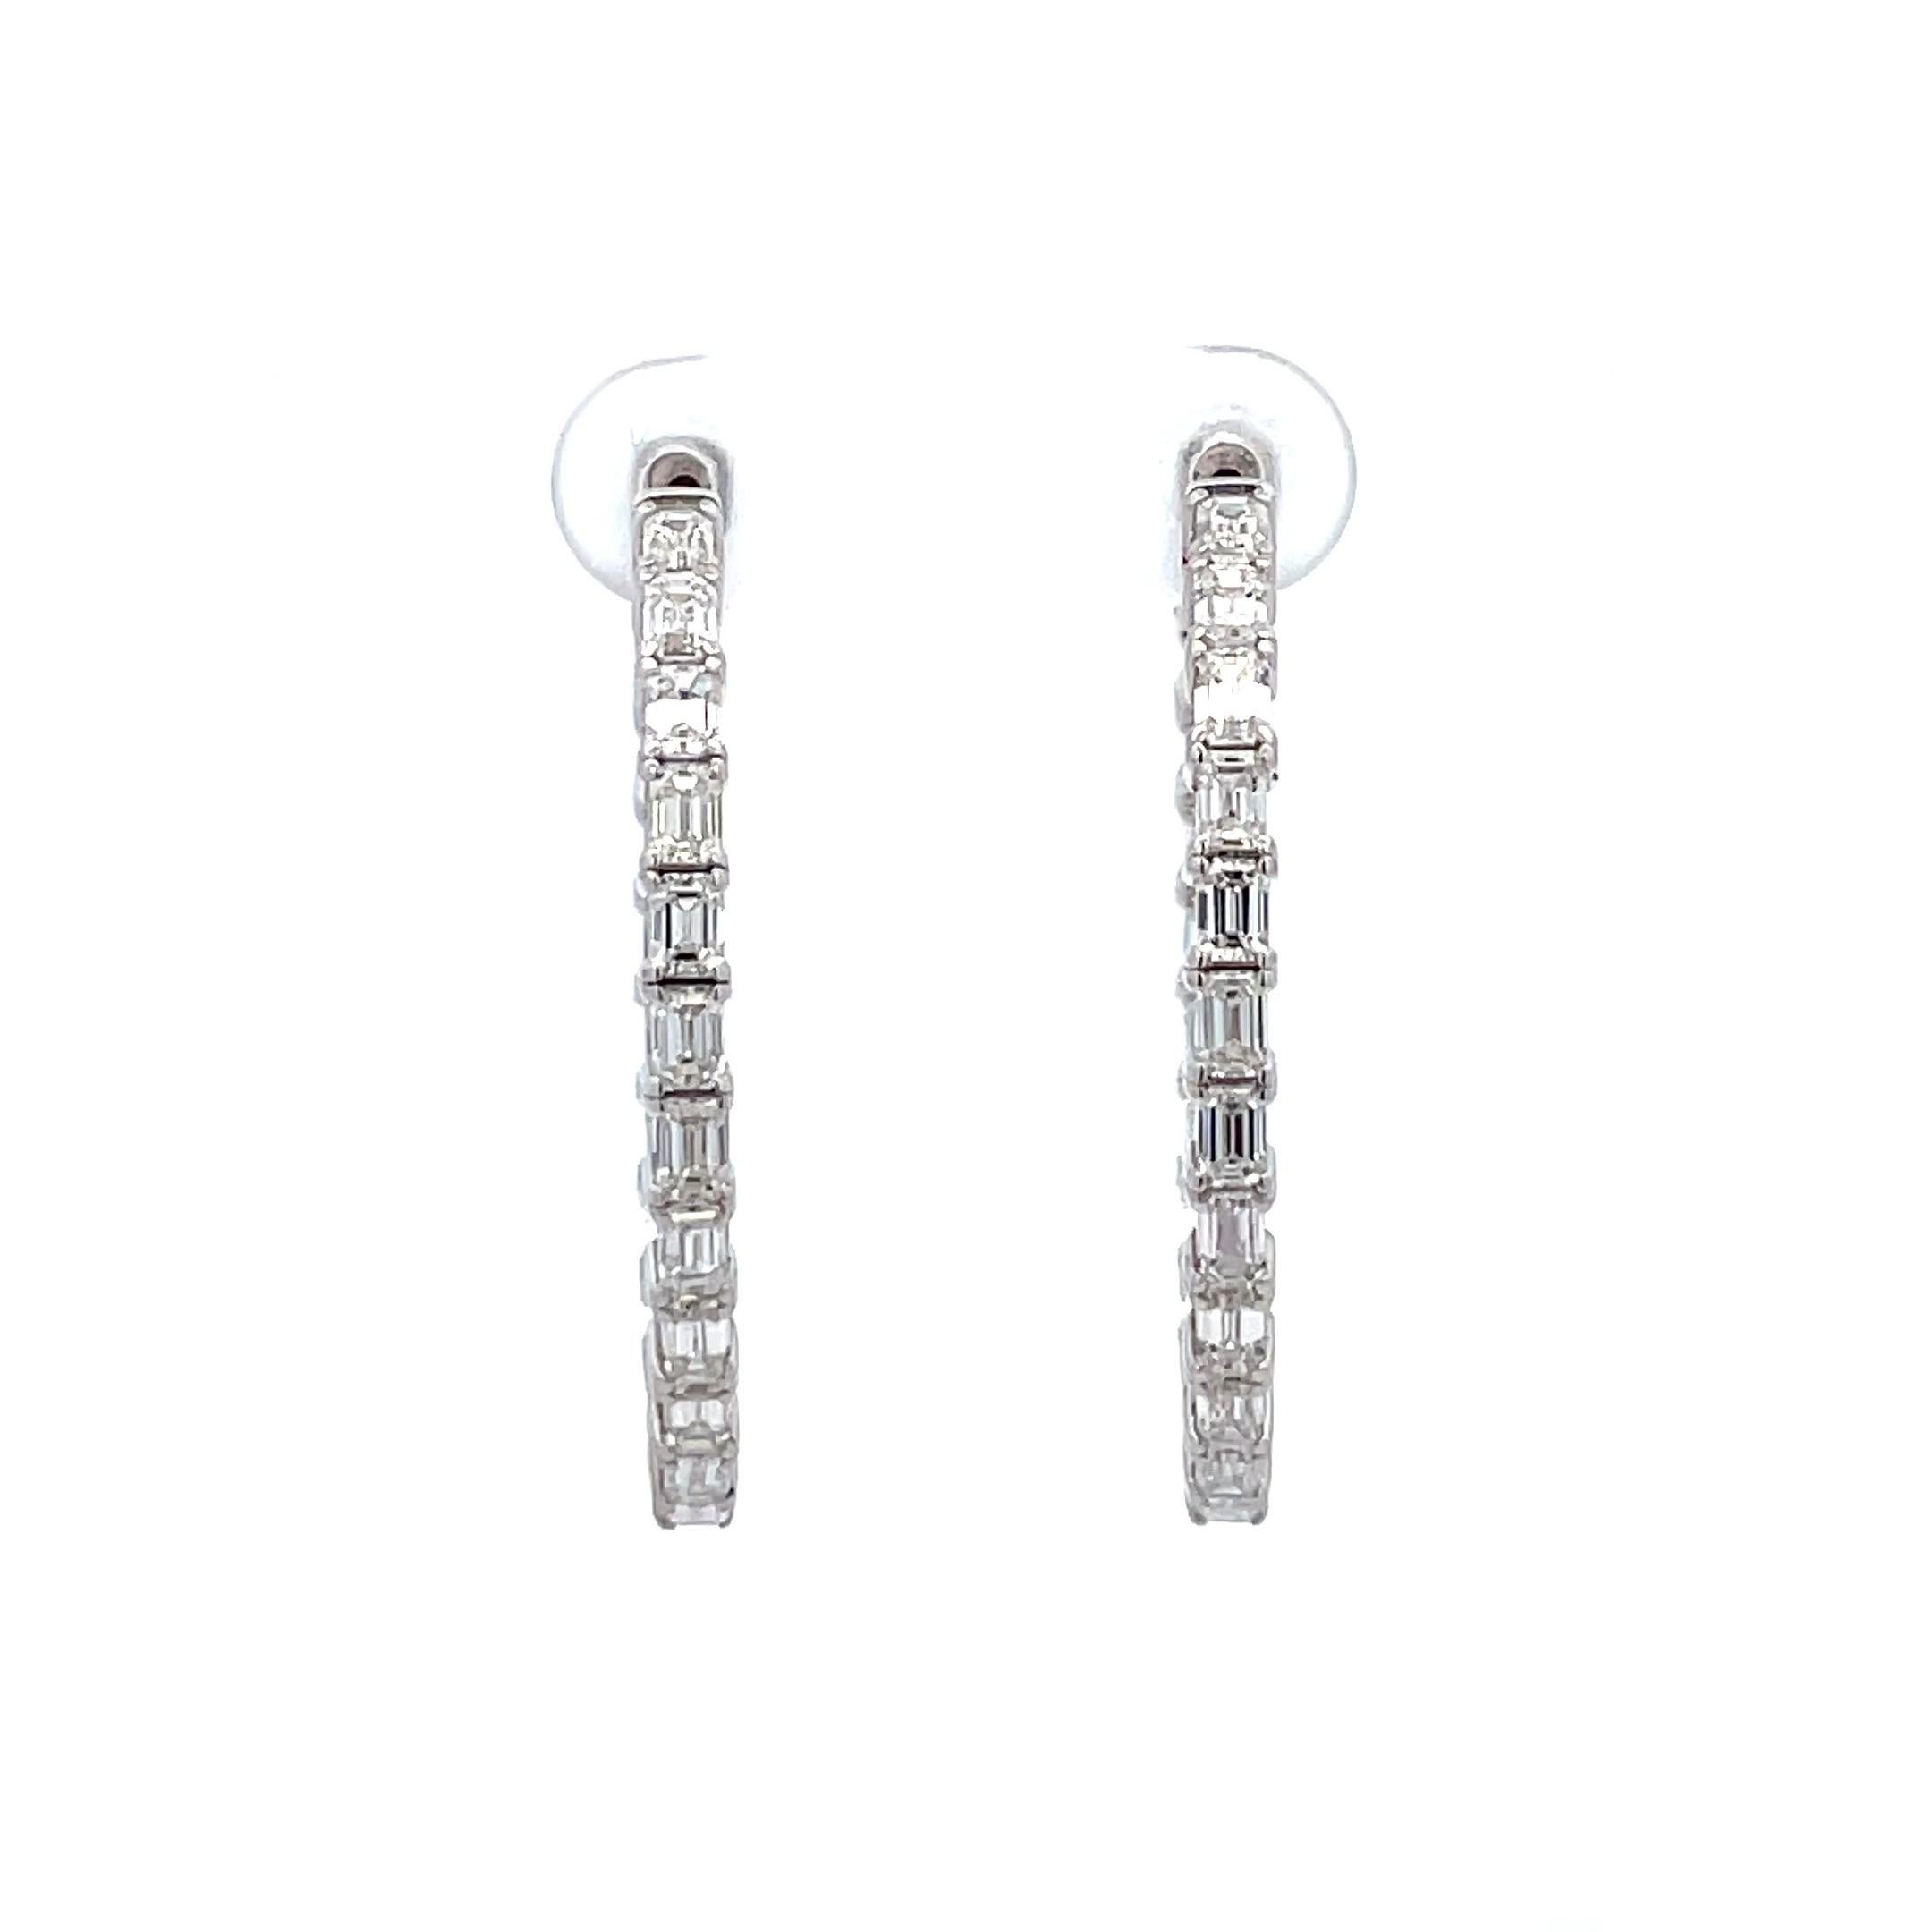 Inside out diamond hoop earrings featuring 44 Emerald cuts weighing 4.01 Carats in 14 Karat White gold. 
Color G
Clarity VVS2-VS2
Average 0.09 Points Each
